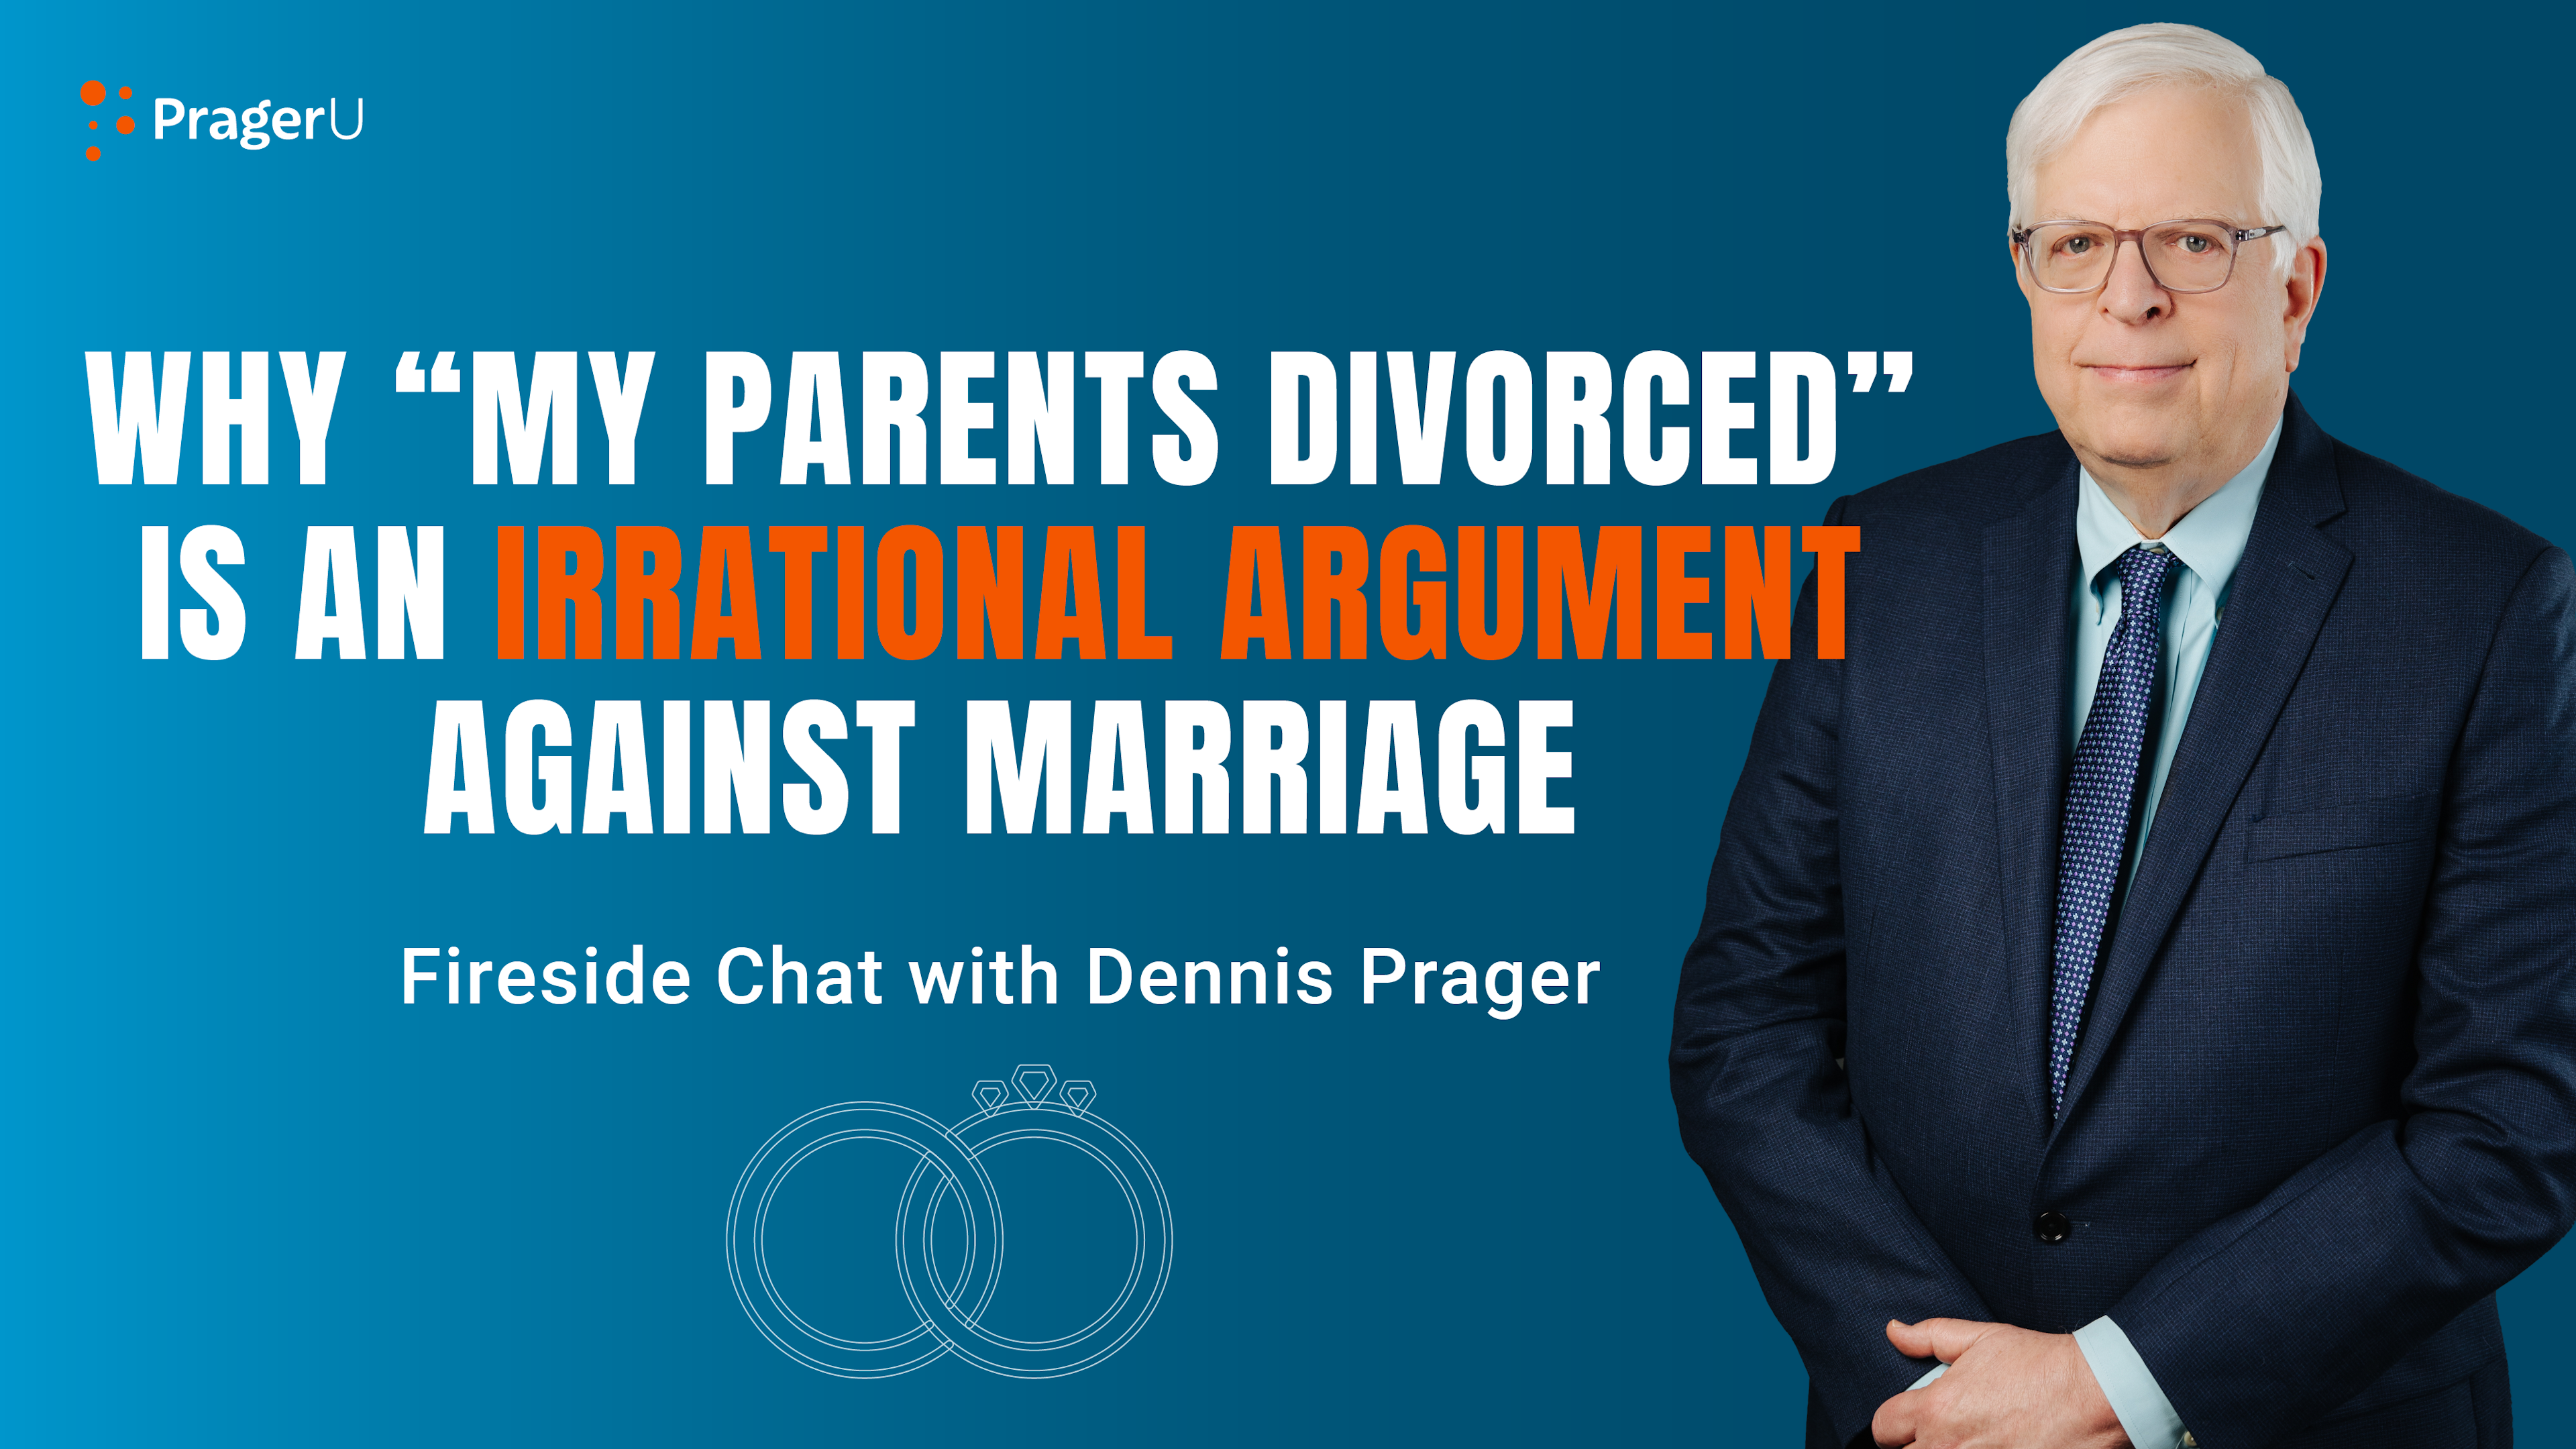 Why "My Parents Divorced” Is an Irrational Argument against Marriage